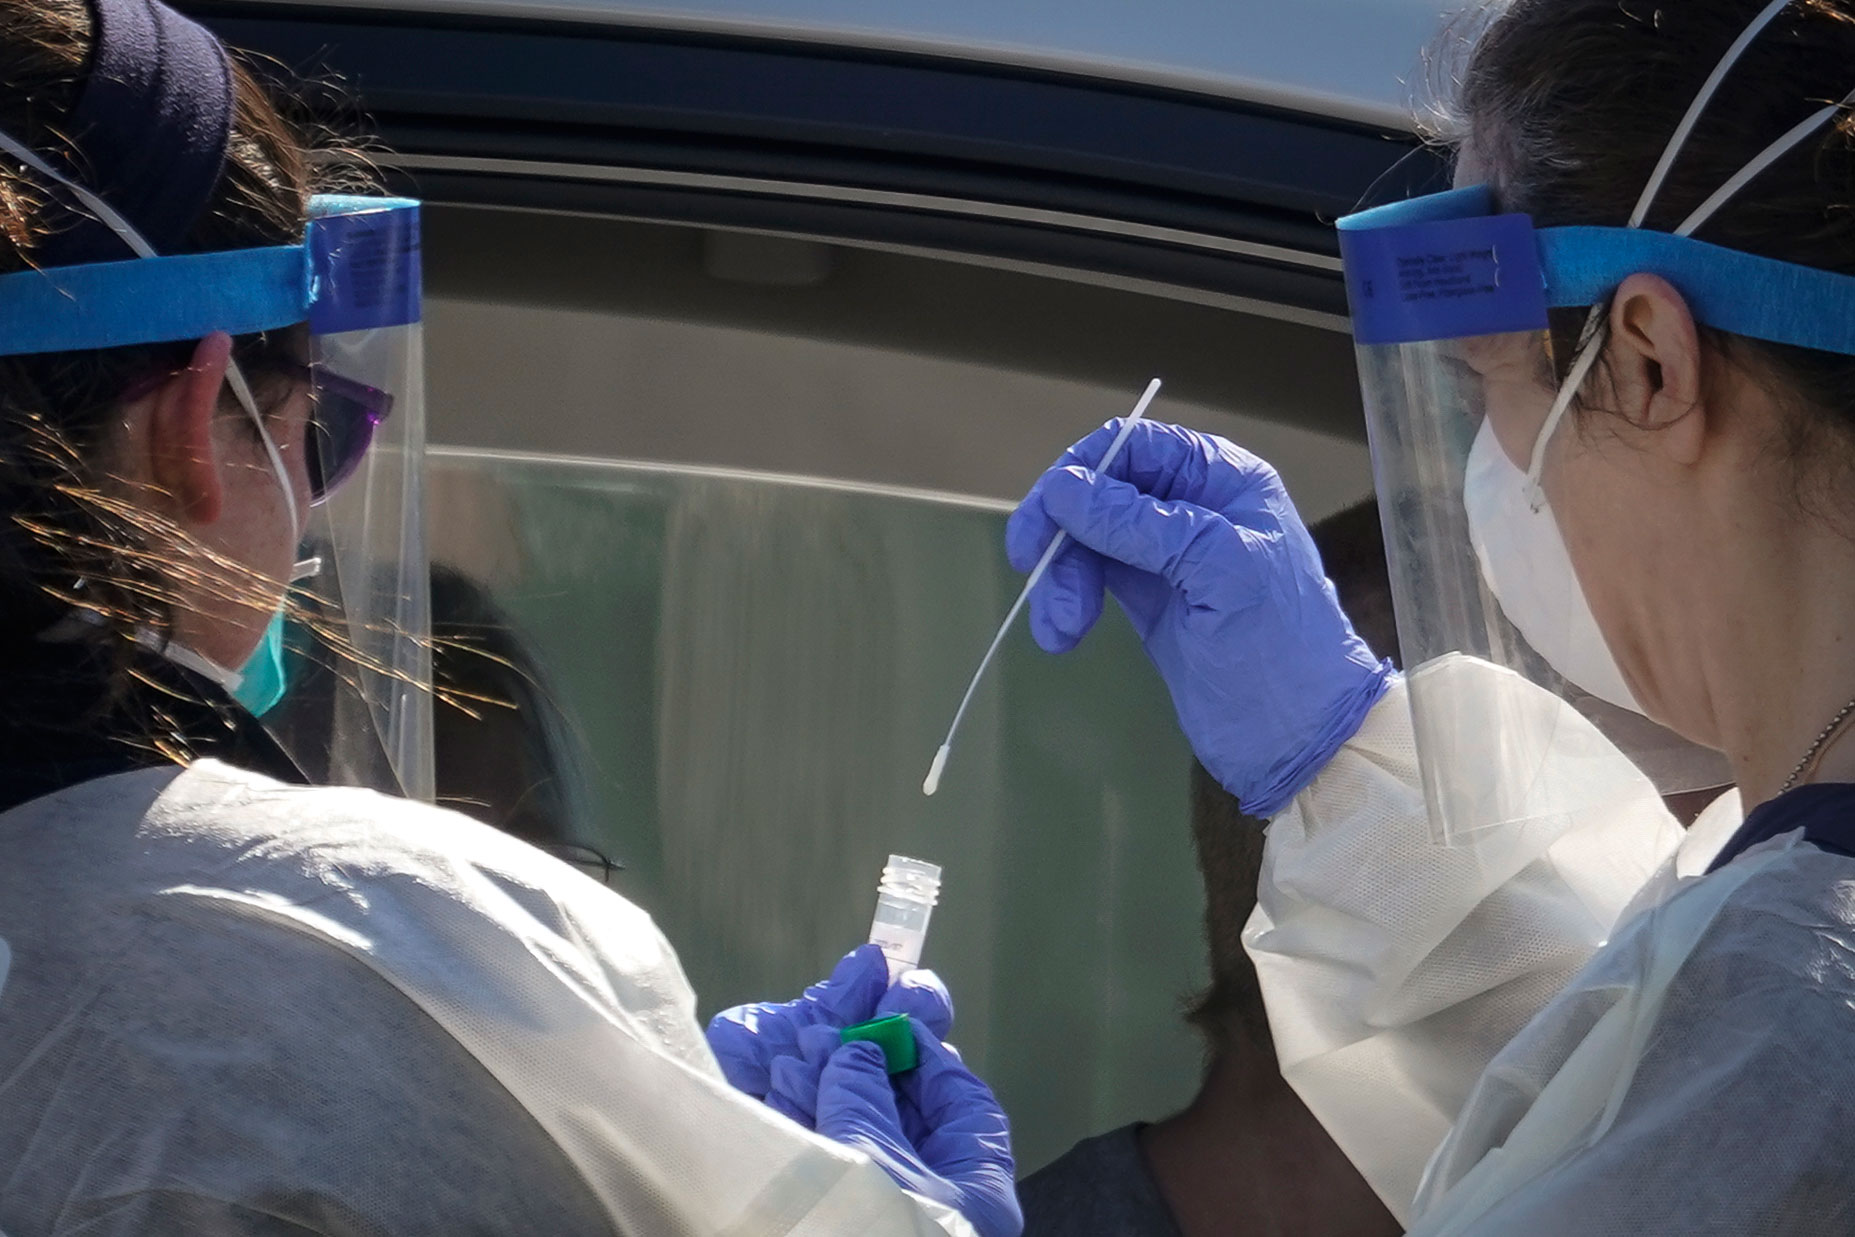 Medical professionals from Children's National Hospital administer a coronavirus test at a drive-thru testing site at Trinity University on April 2 in Washington, DC.